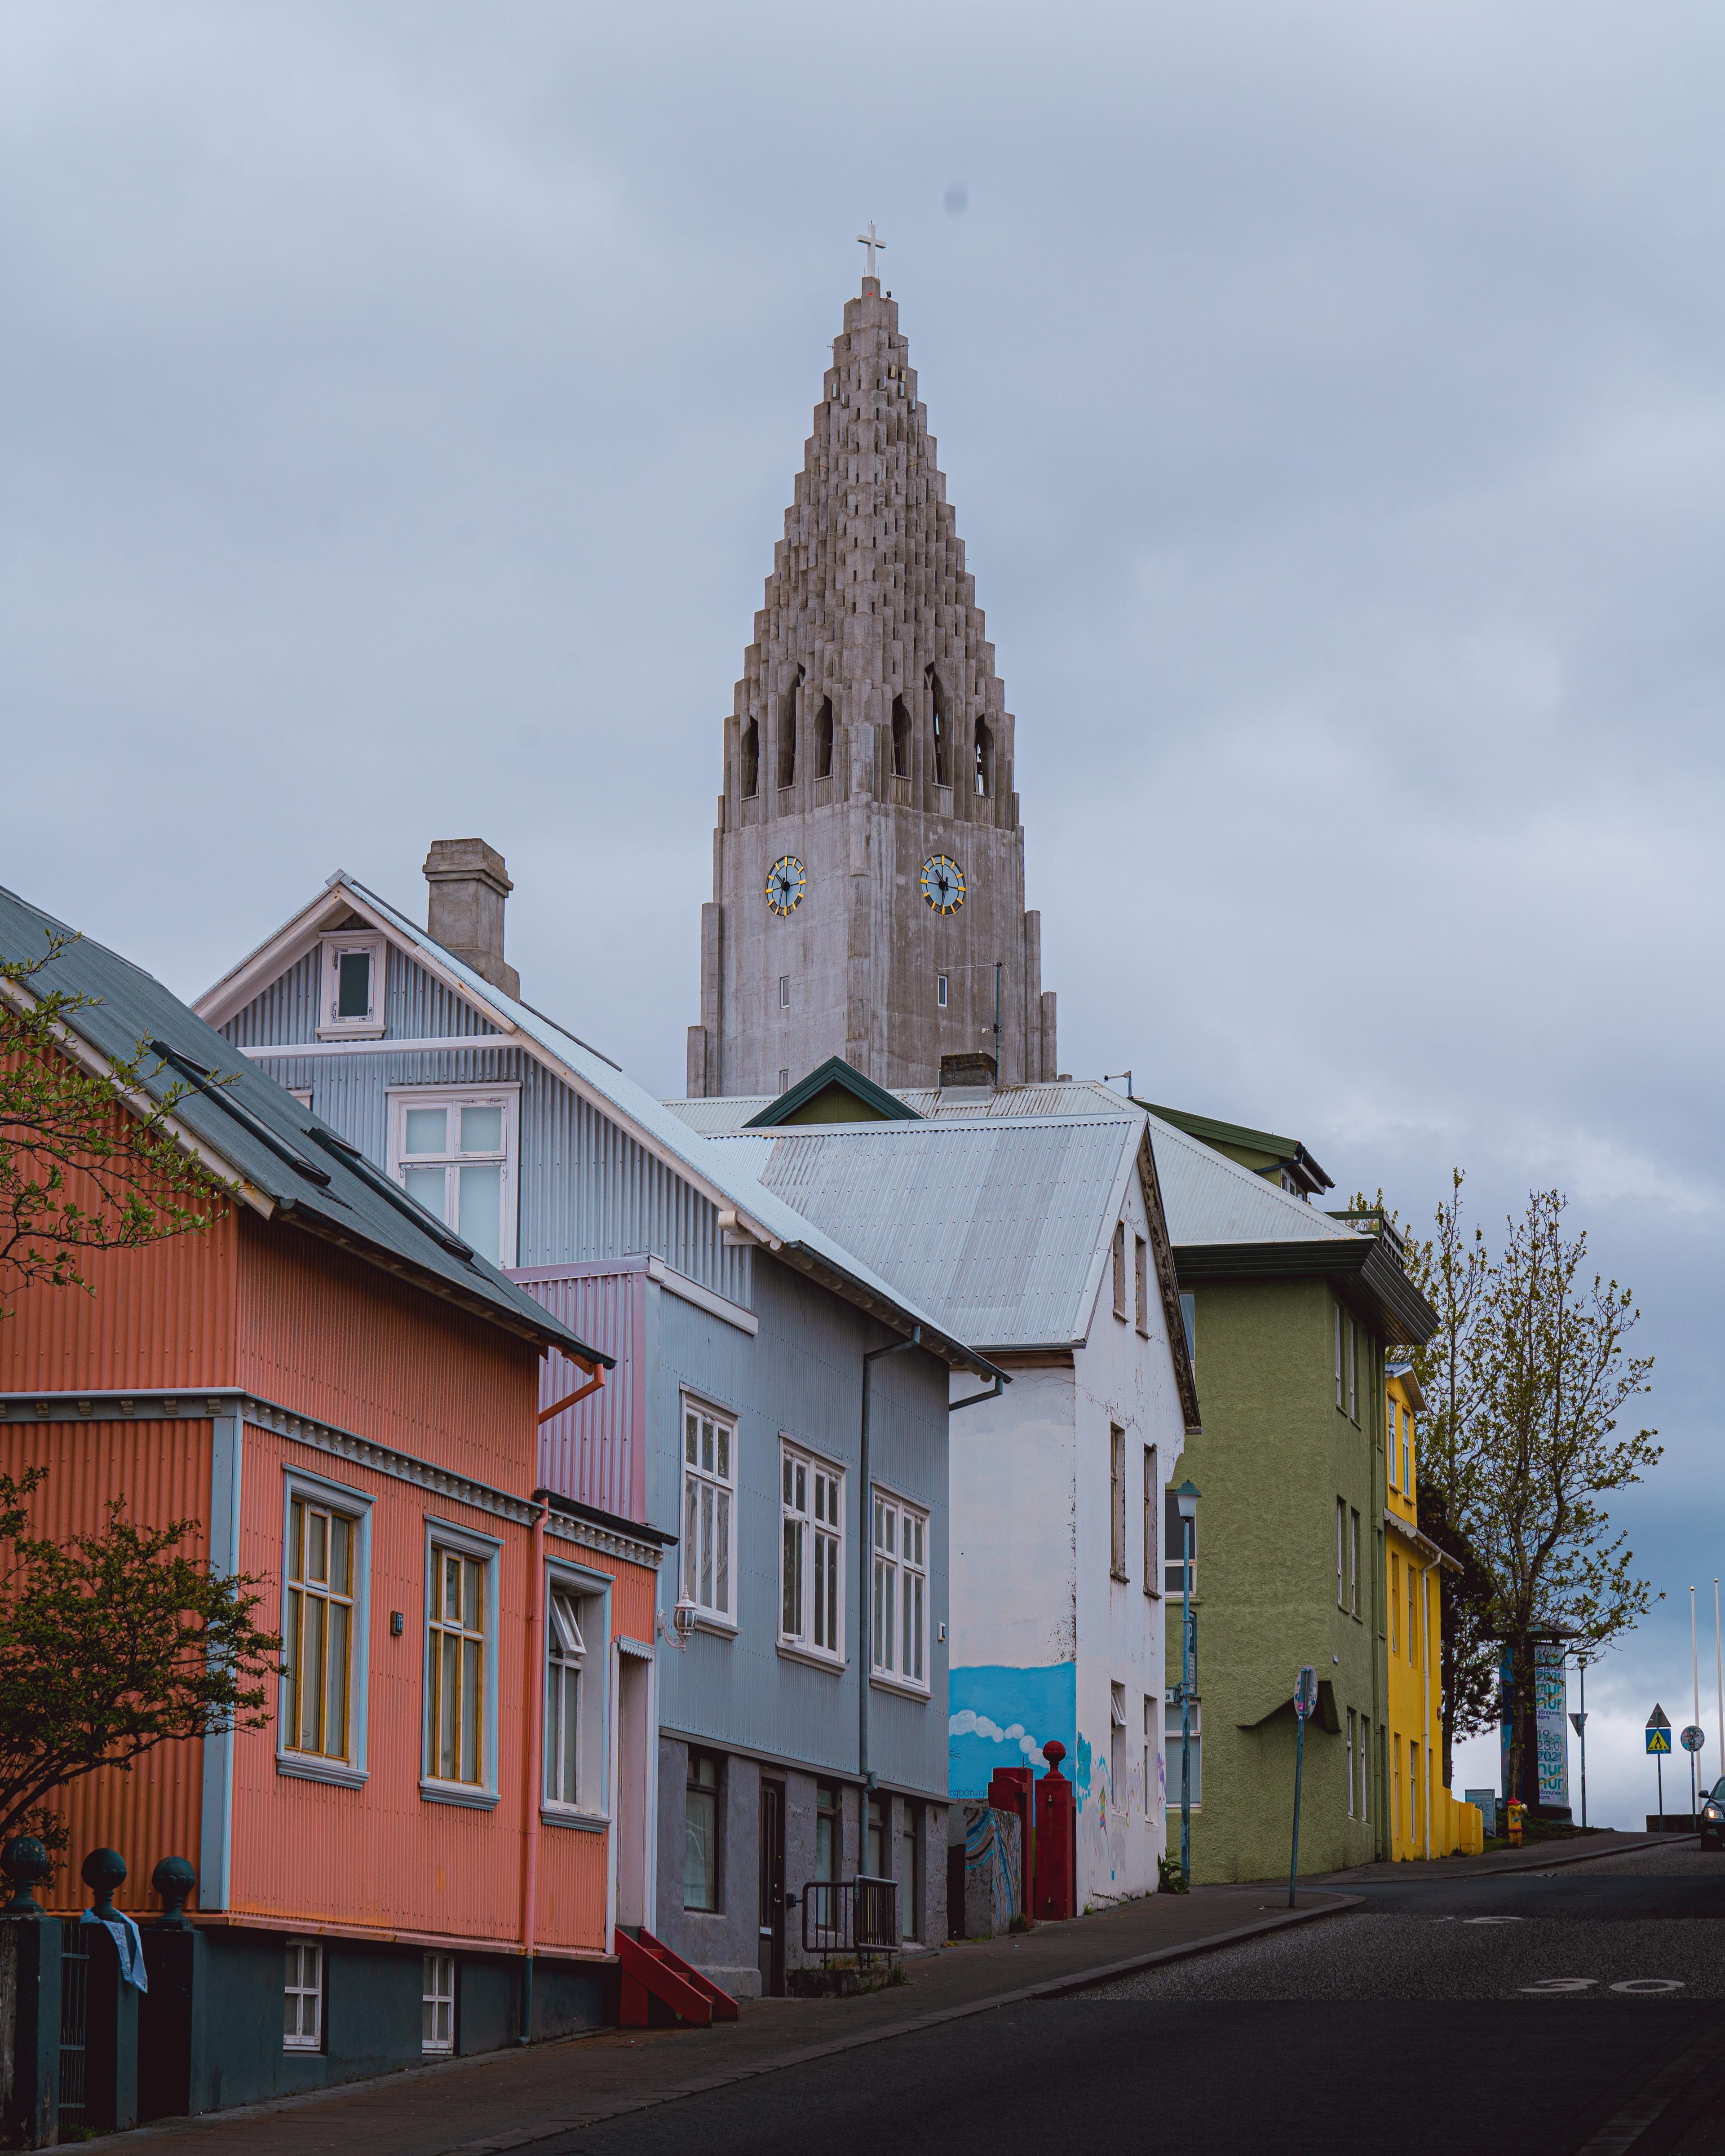 Street view of Reykjavík with the towering spire of Hallgrímskirkja church looming over vibrant-hued houses.